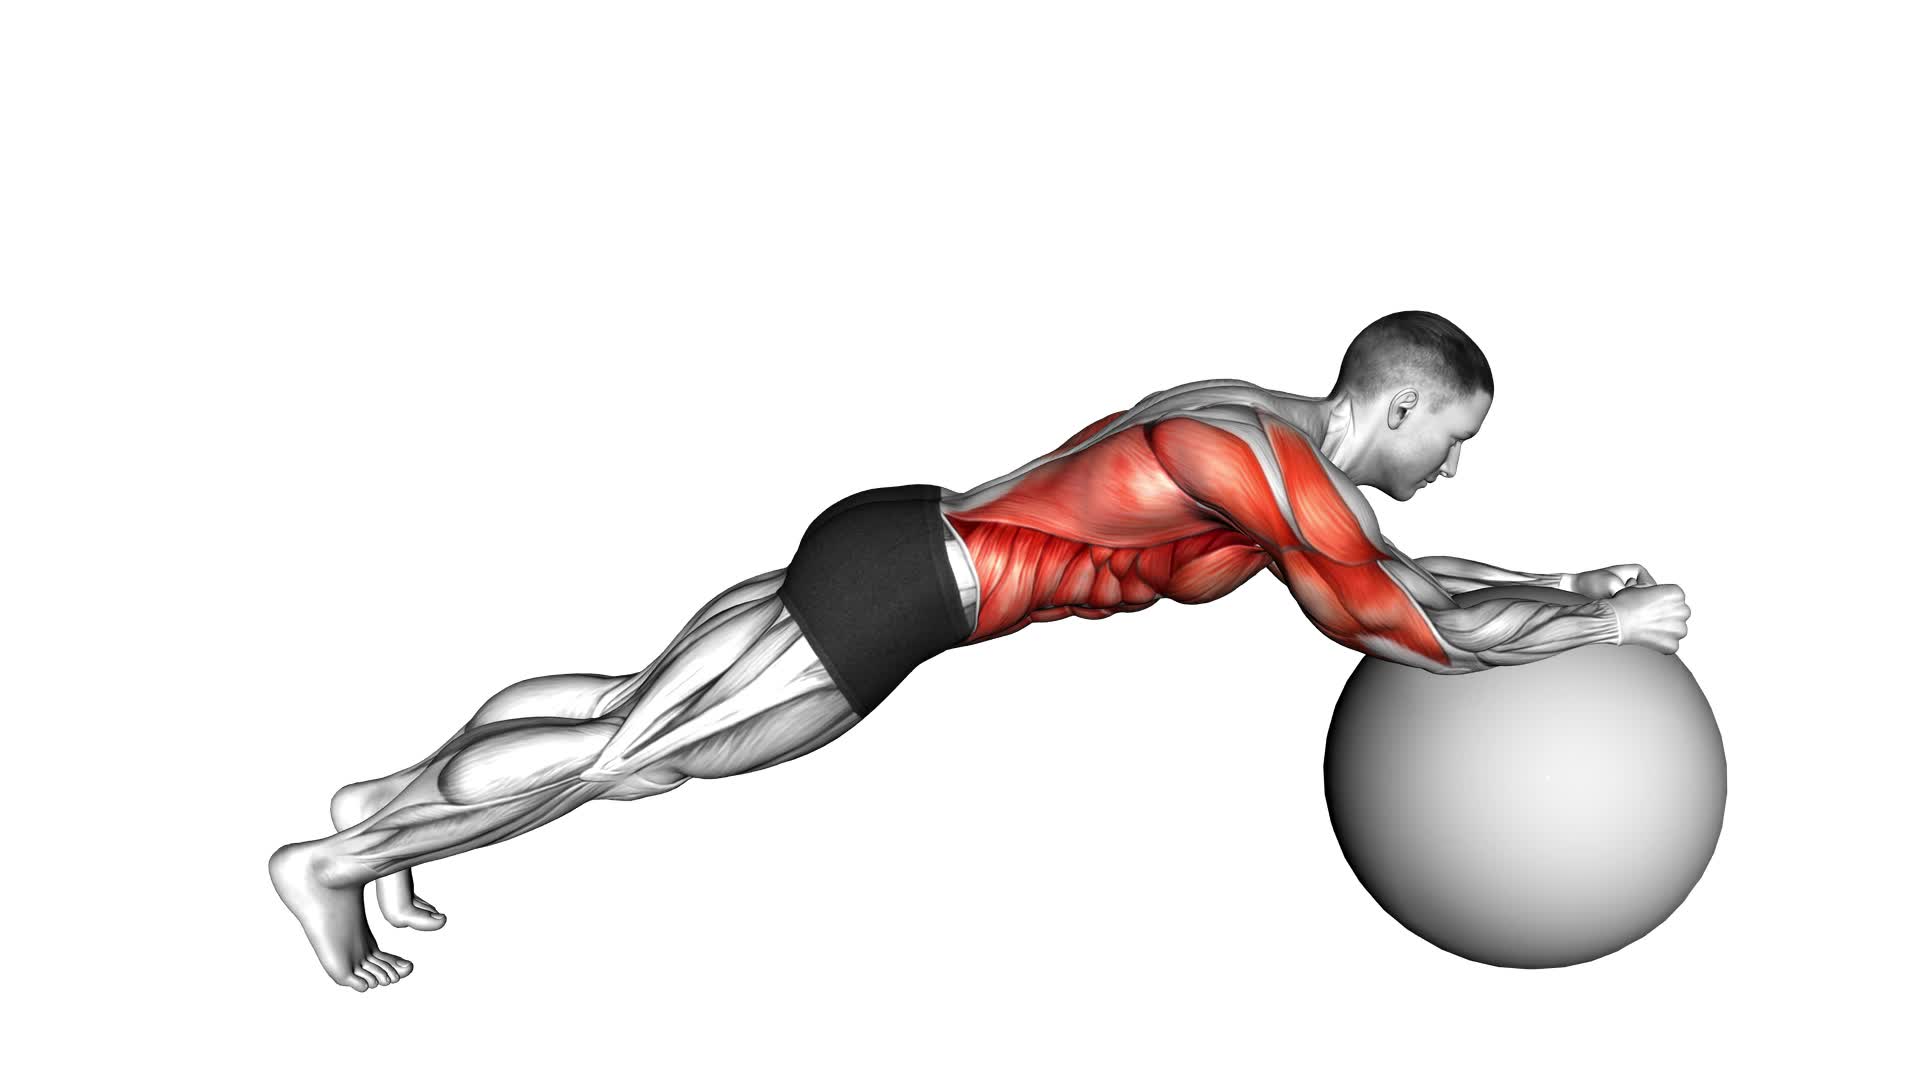 Exercise Ball Body Saw - Video Exercise Guide & Tips